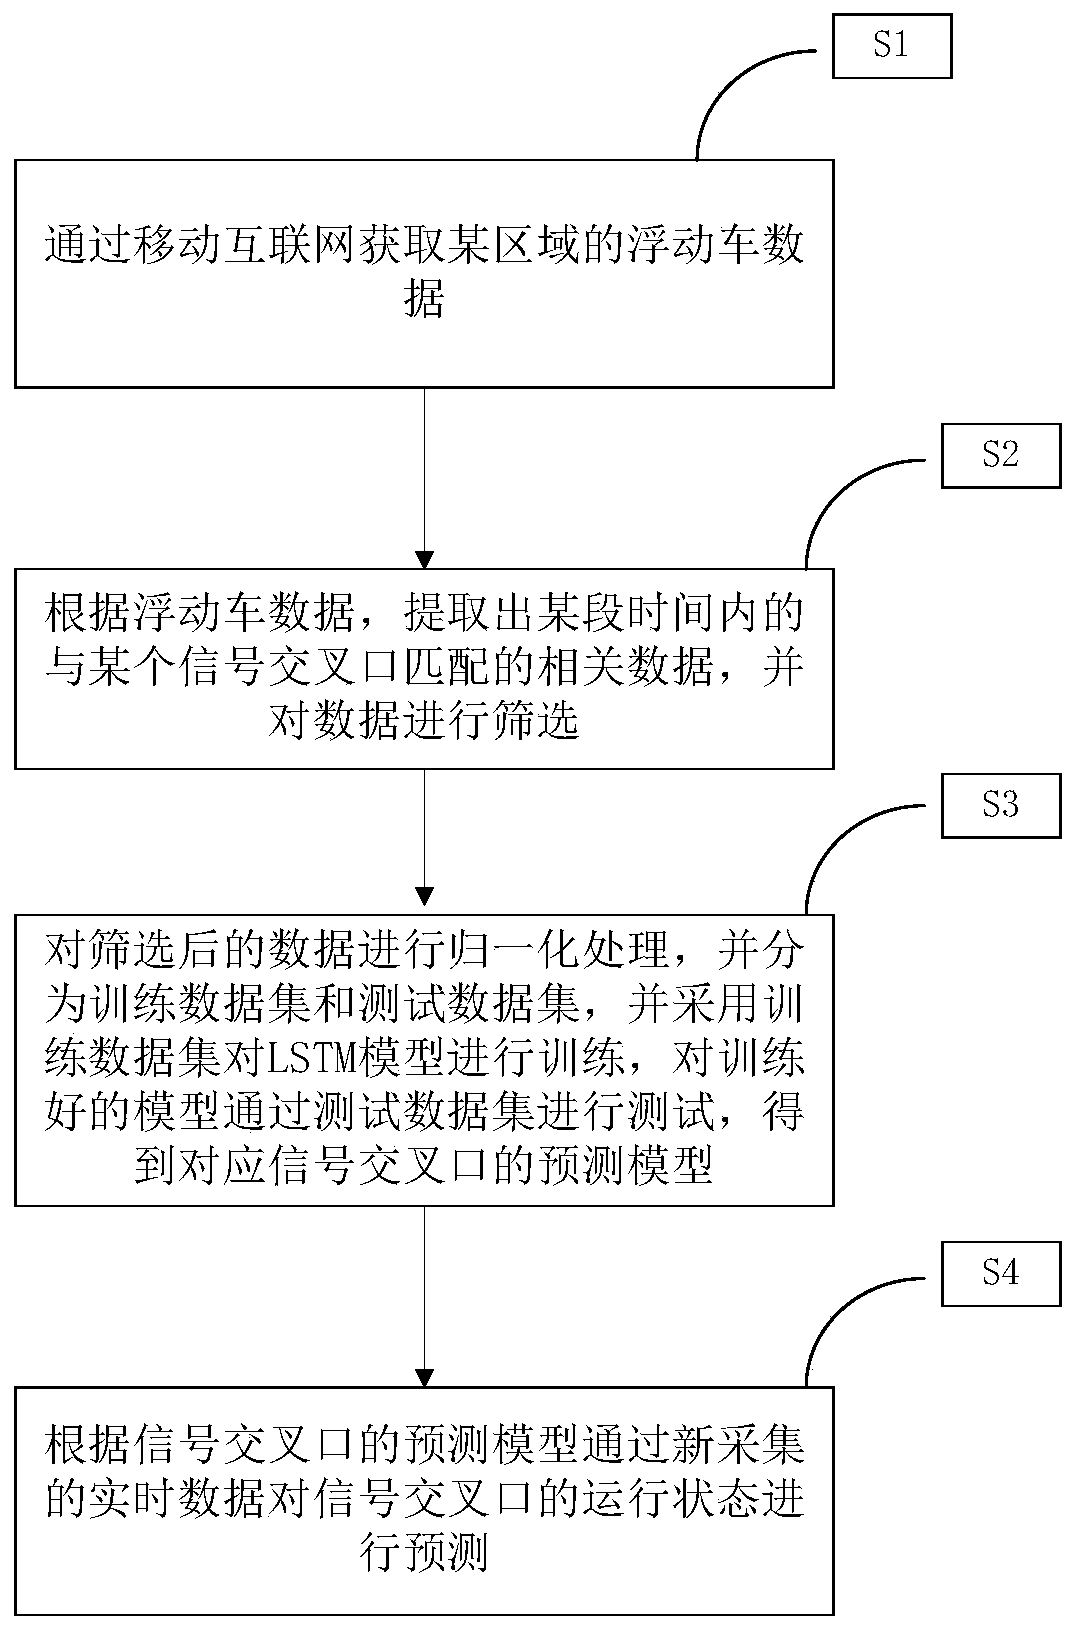 signalized intersection operation state prediction method and system based on an LSTM model